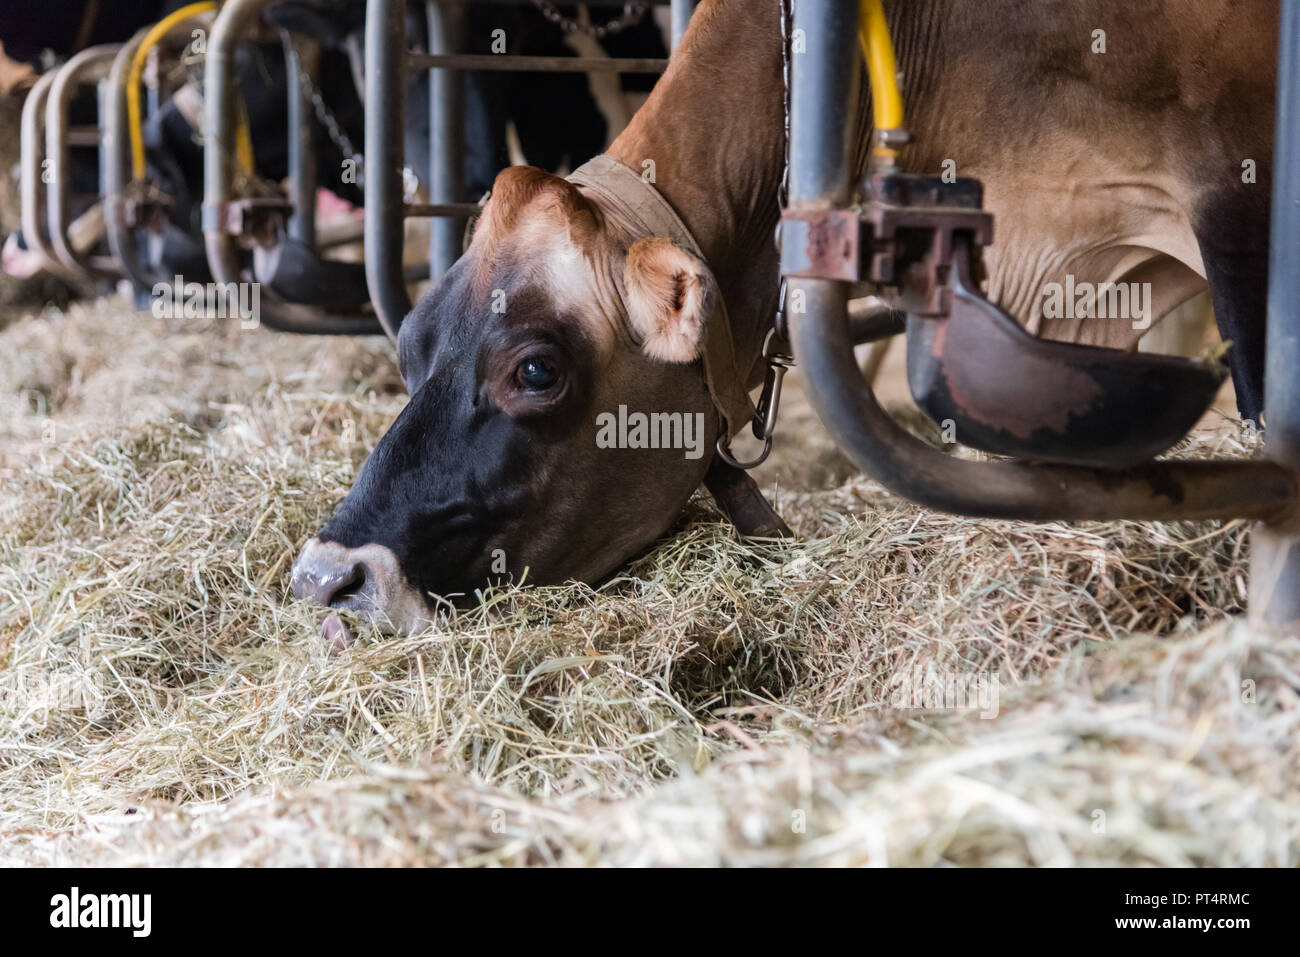 Jersey cow eating hay from ground in barn Stock Photo